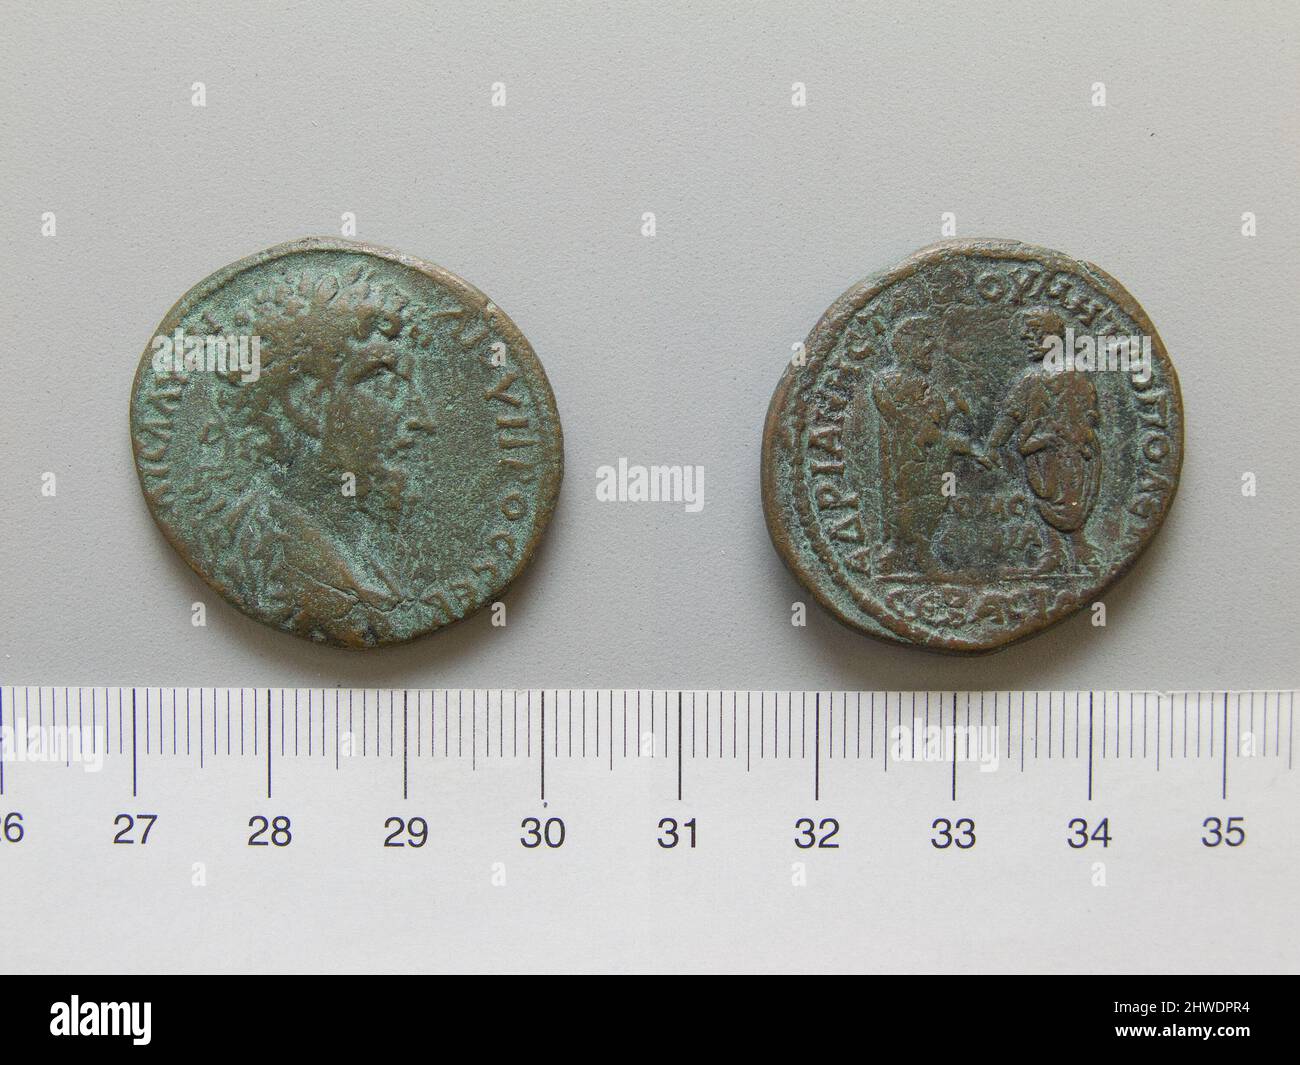 Coin of L. Verus, Emperor of Rome from Tarsus. Ruler: L. Verus, Emperor of Rome, A.D. 161-169 Mint: Tarsus Artist: Unknown Stock Photo